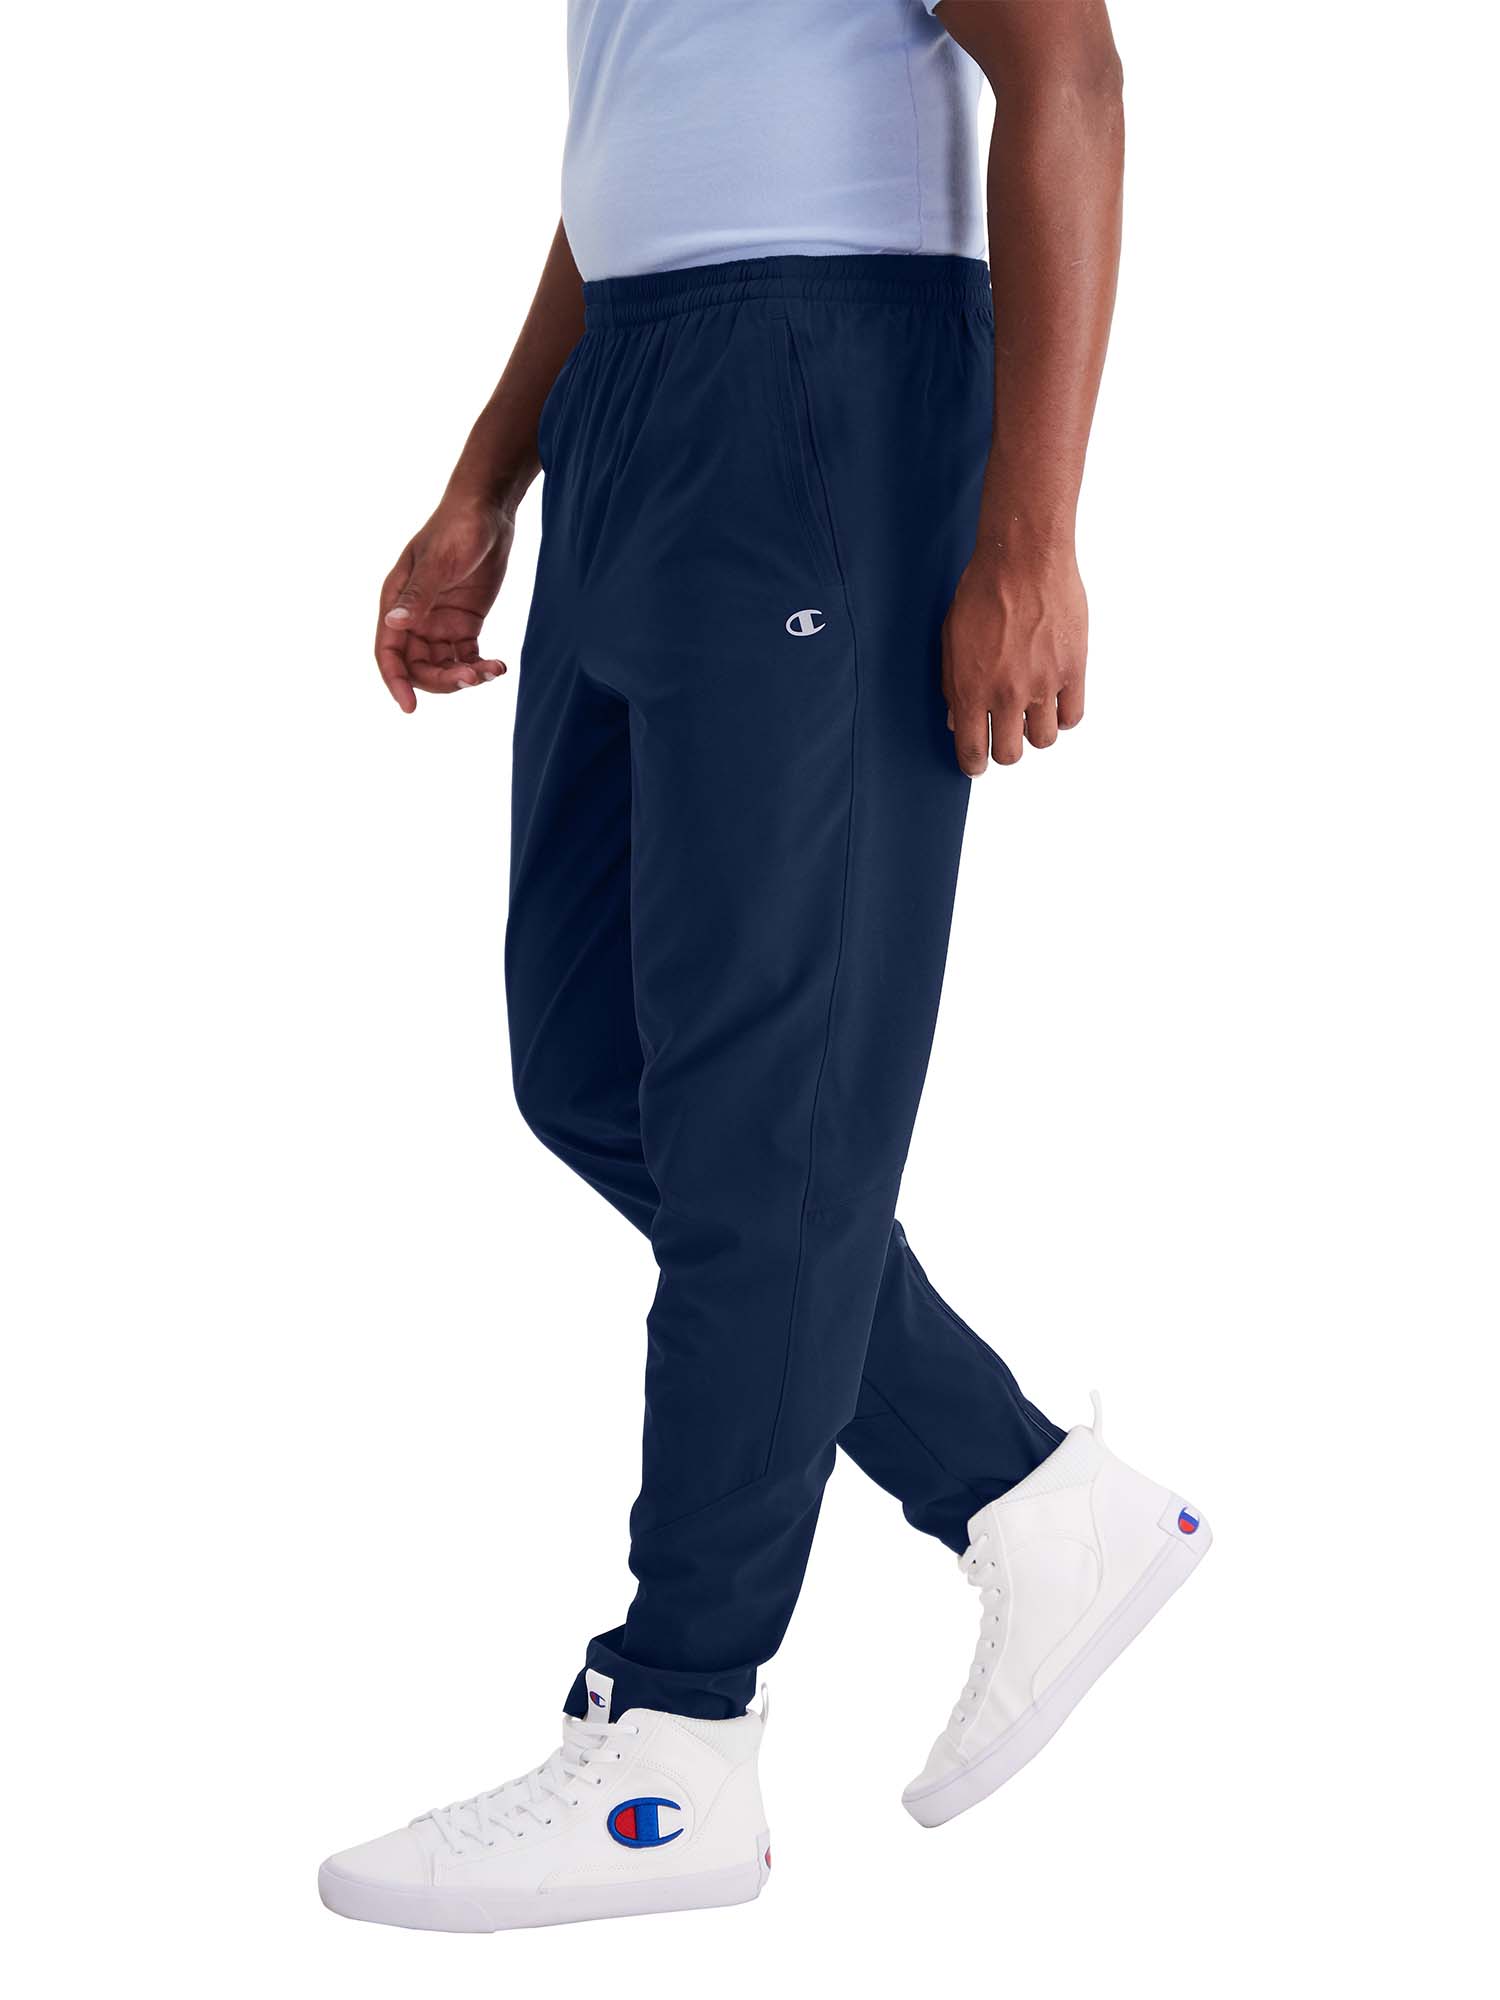 Champion Men's Core Performance Training Sport Pant 30.5" inseam length, up to Size 2XL - image 3 of 6